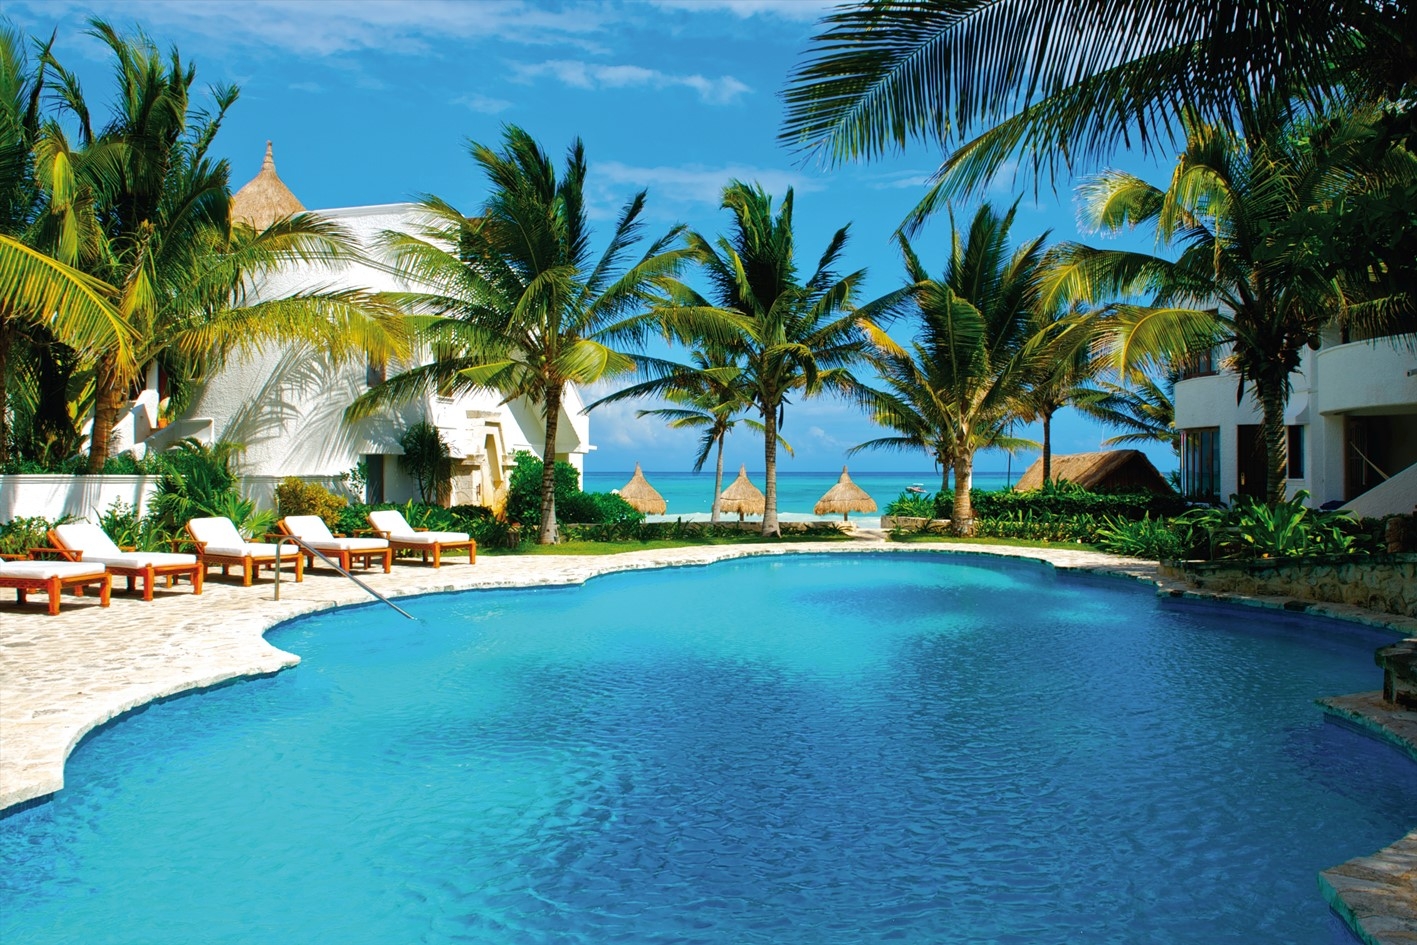 Pool at Belmond Maroma Resort in Mexico